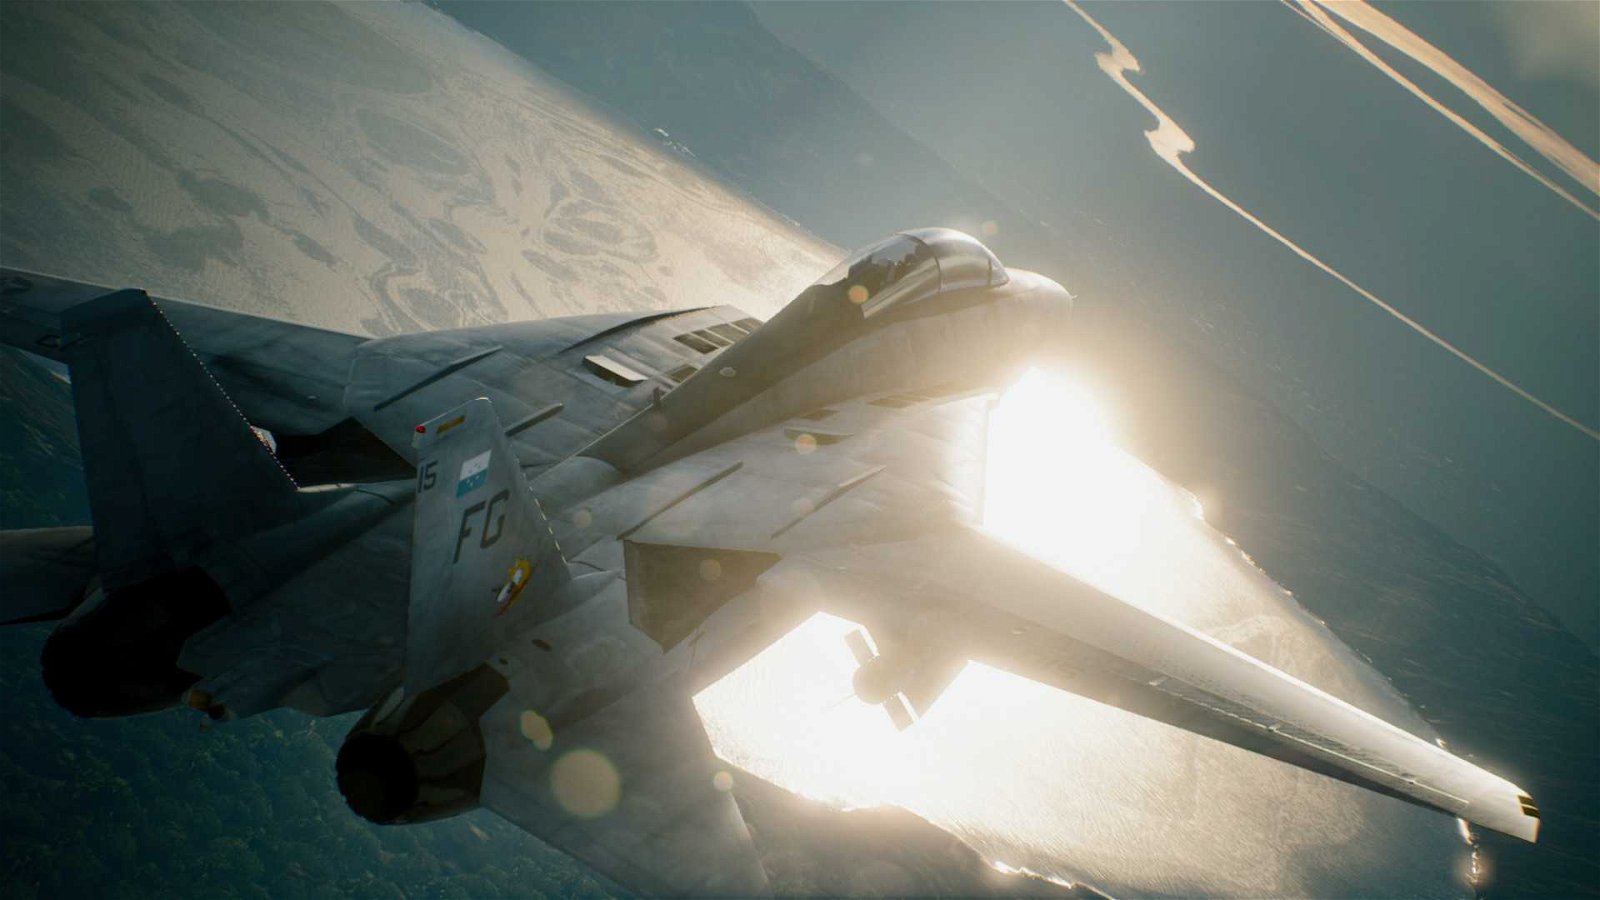 Ace Combat 7: Skies Unknown Reviews, Pros and Cons